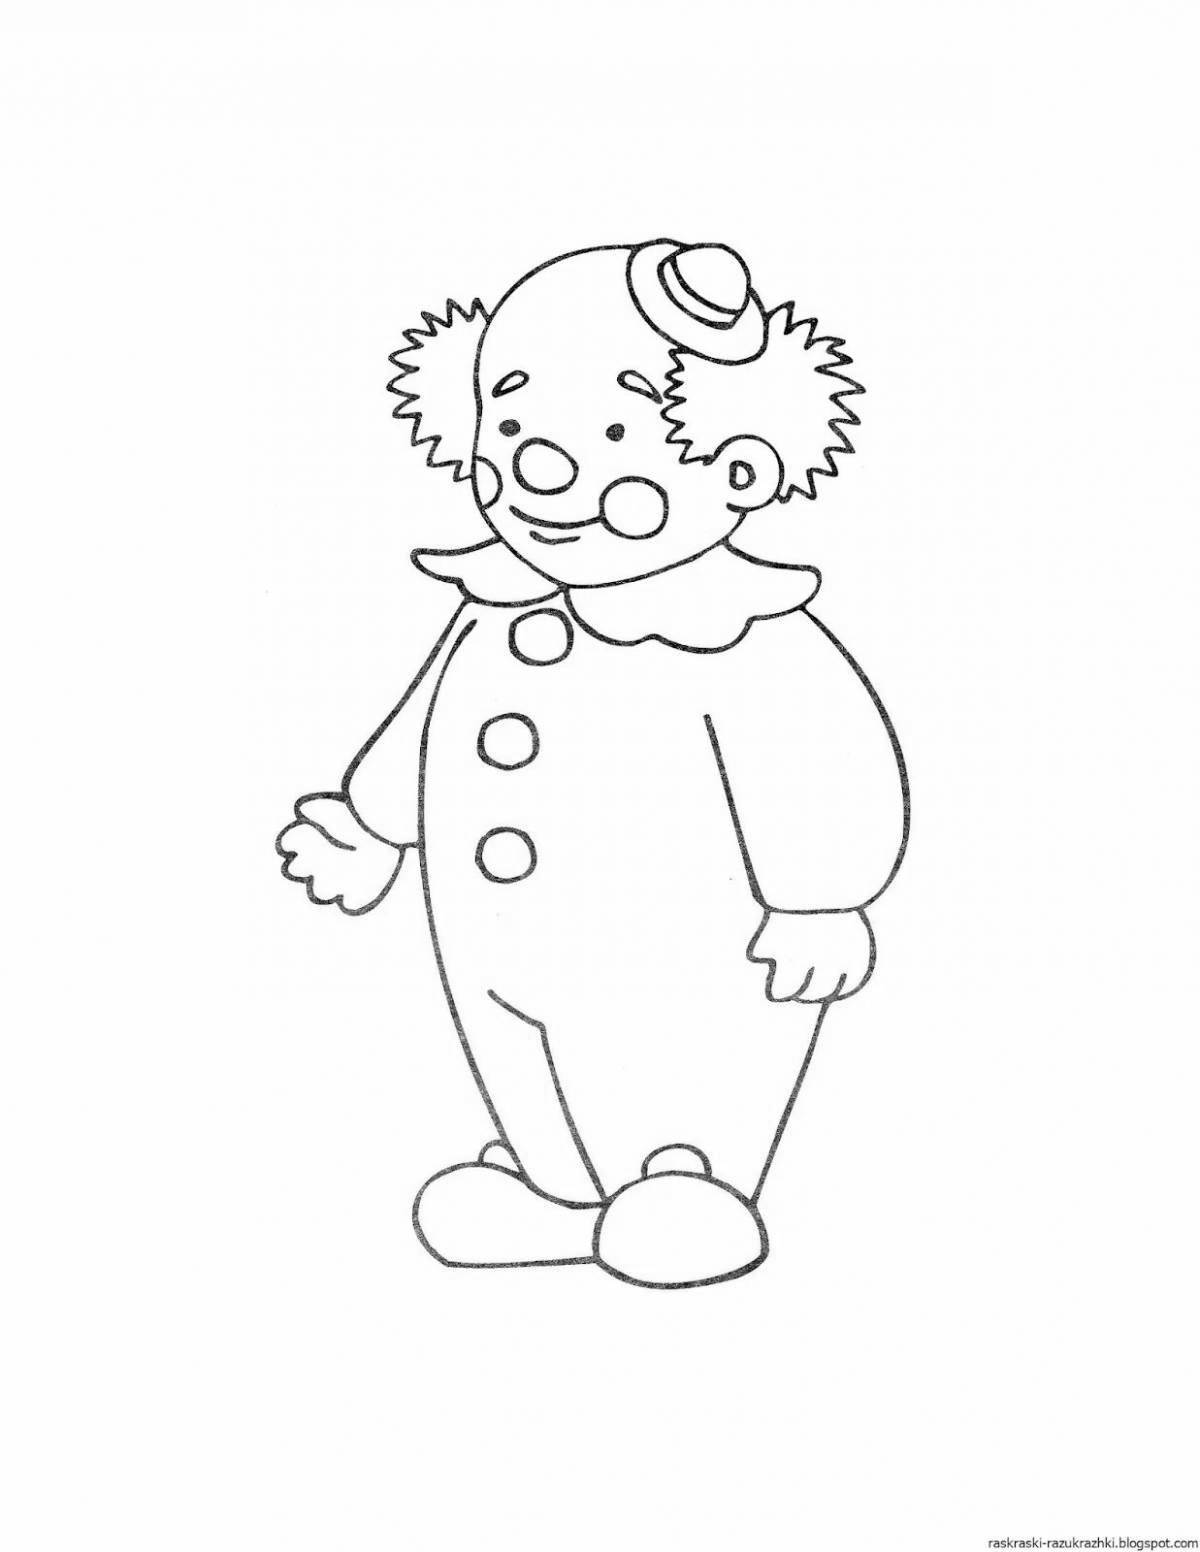 Playful clown drawing for kids